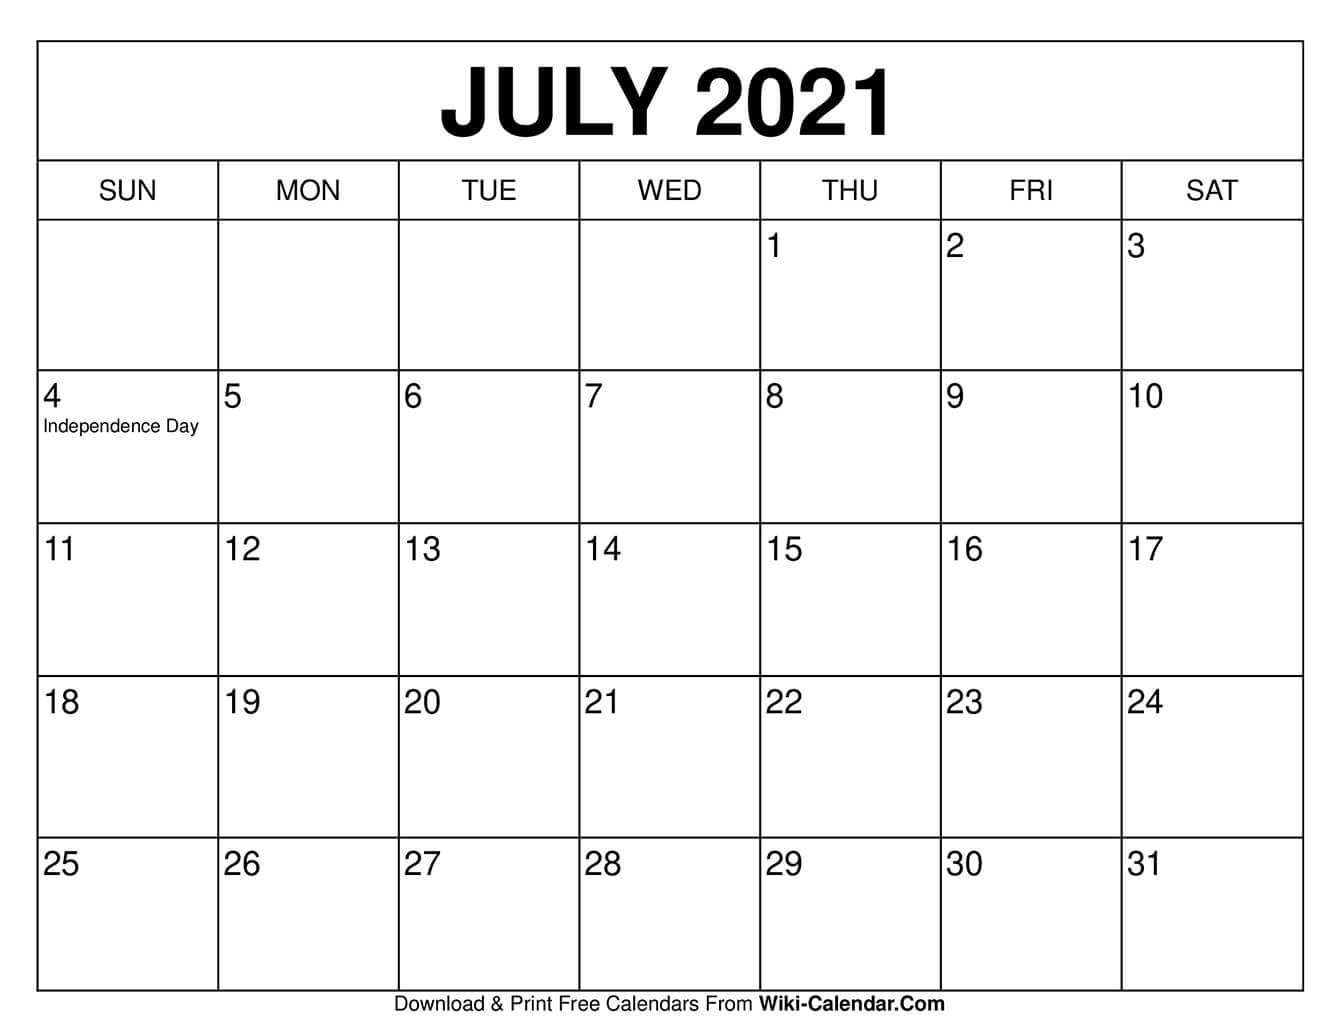 Free Printable July 2021 Calendars July 2021 Calendar With Holidays